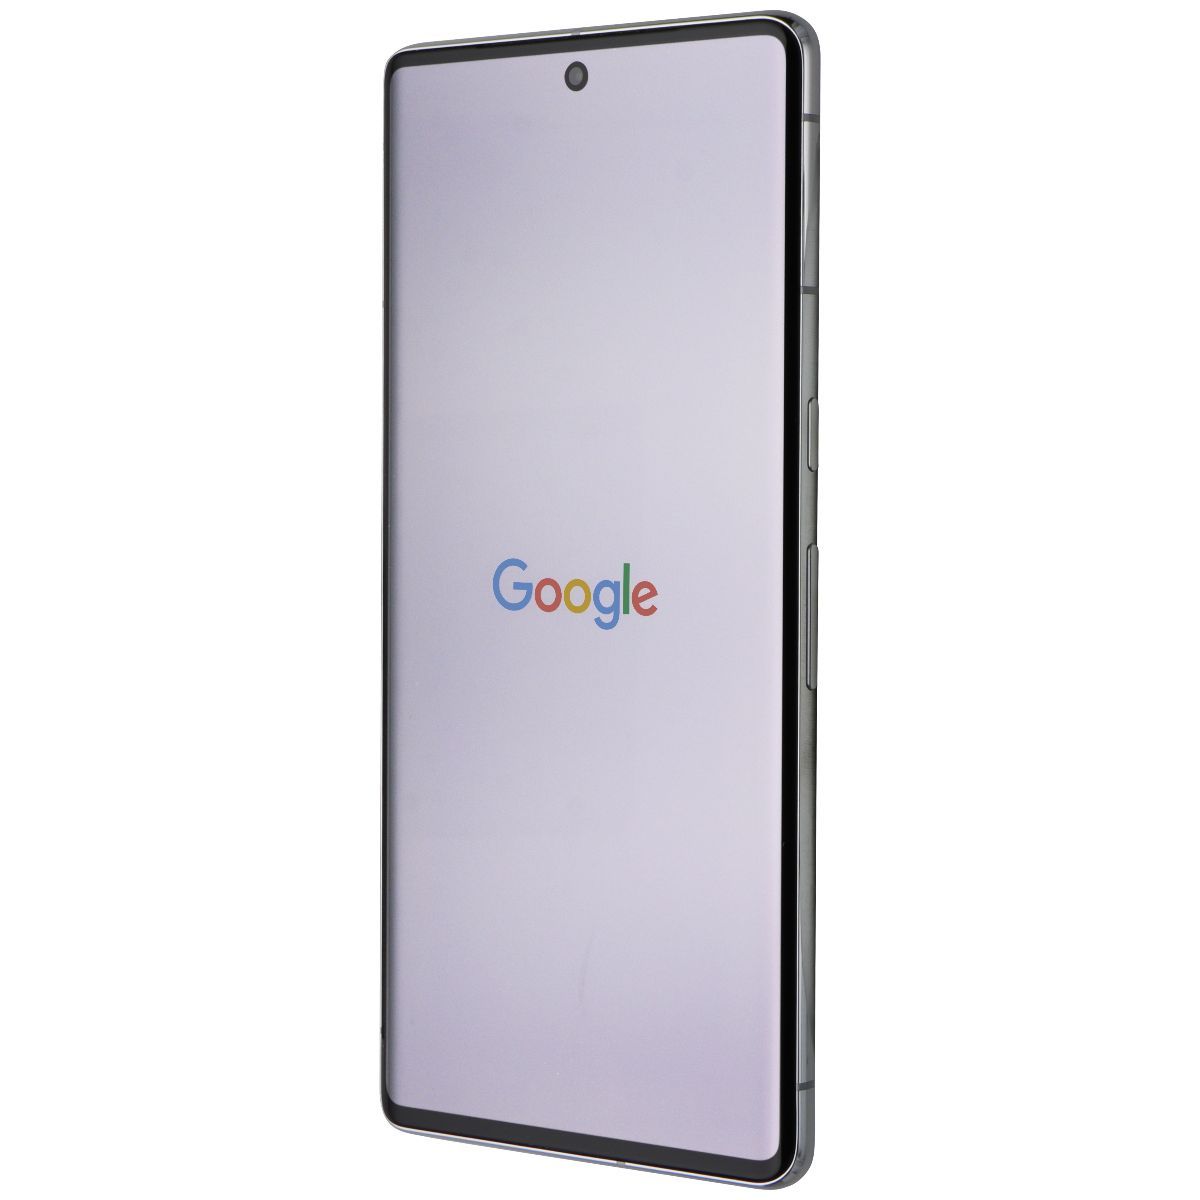 Google Pixel 6 Pro (6.7-inch) Smartphone (G8VOU) Verizon - 128GB/Cloudy White Cell Phones & Smartphones Google    - Simple Cell Bulk Wholesale Pricing - USA Seller